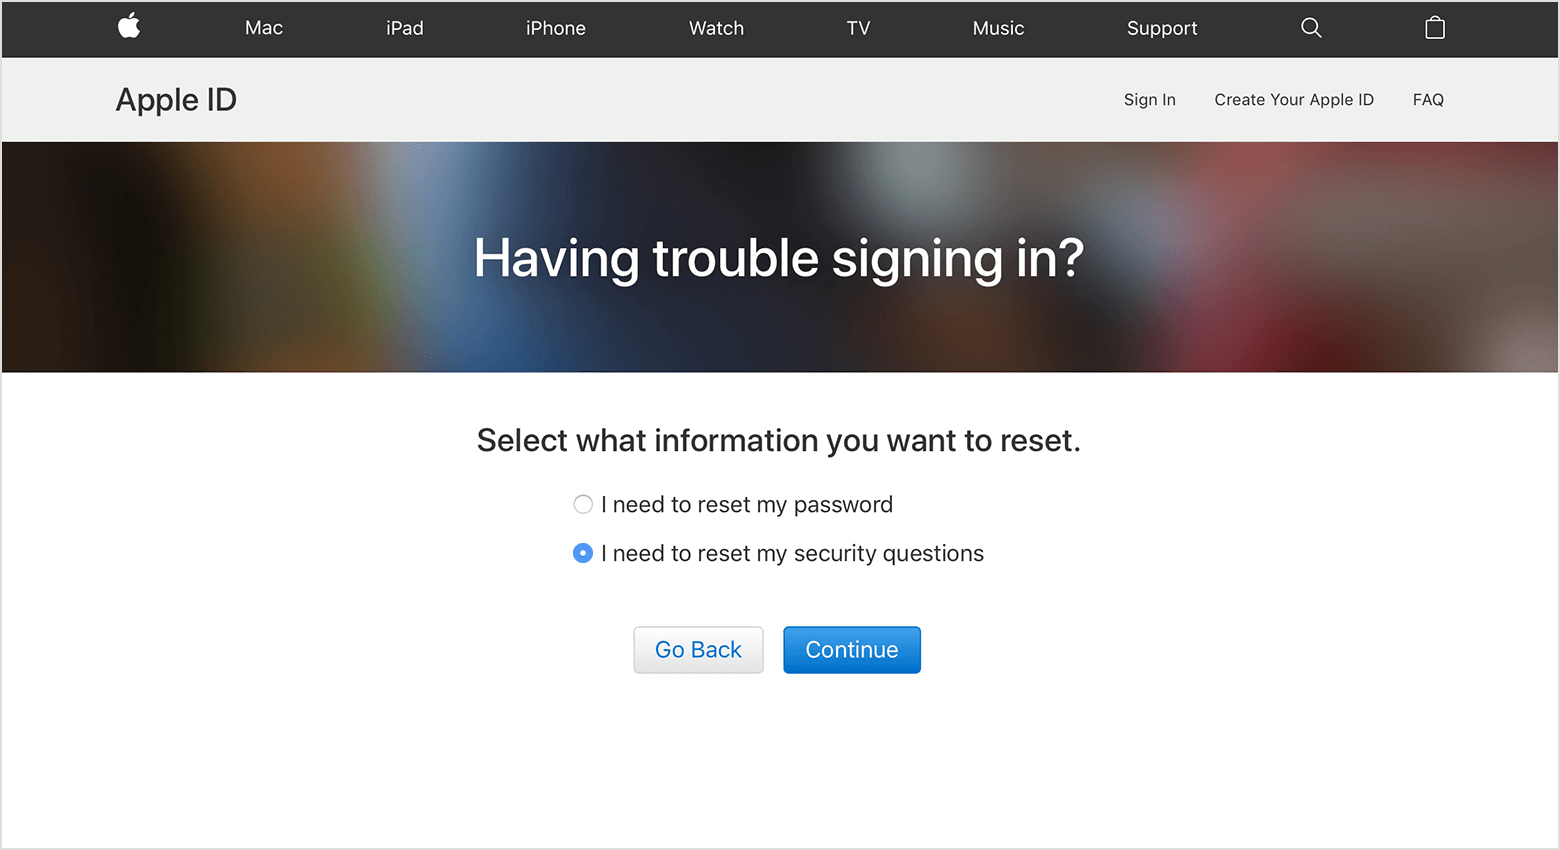 Secret questions are the keys to restore access to Apple ID